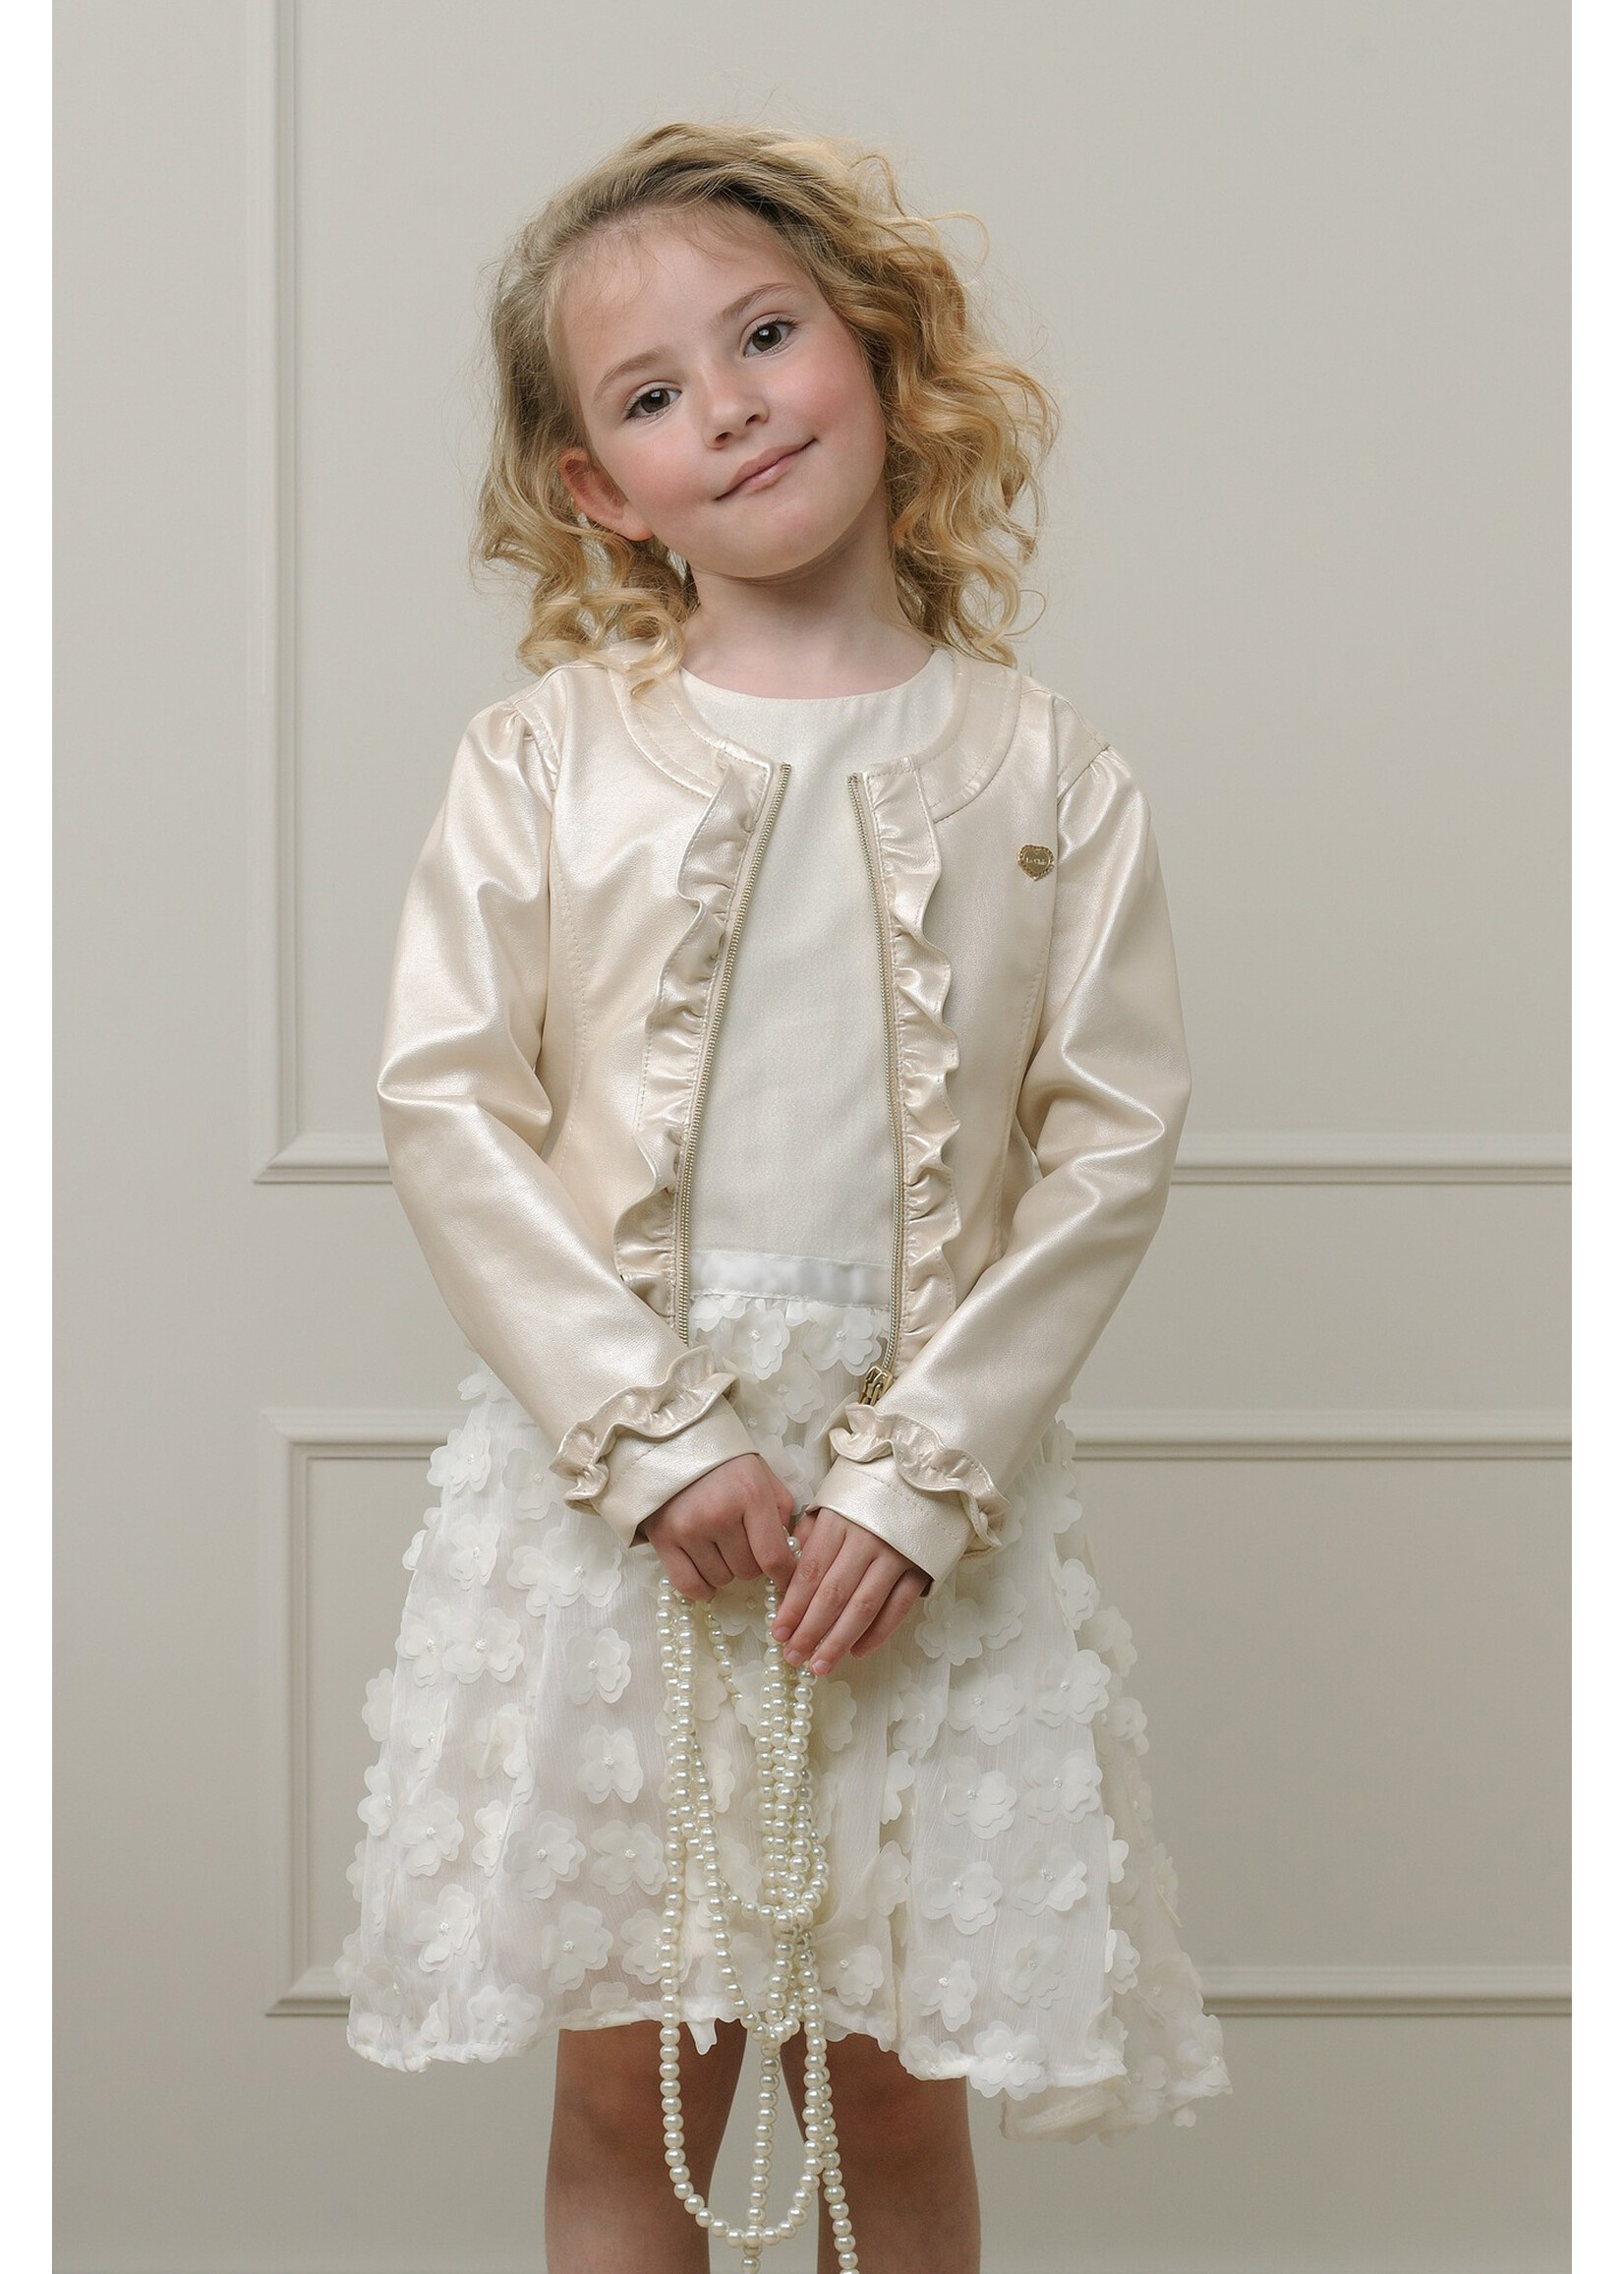 Le Chic Girls Kids C312-5801 SYMPHONICA flower voile dress Off White